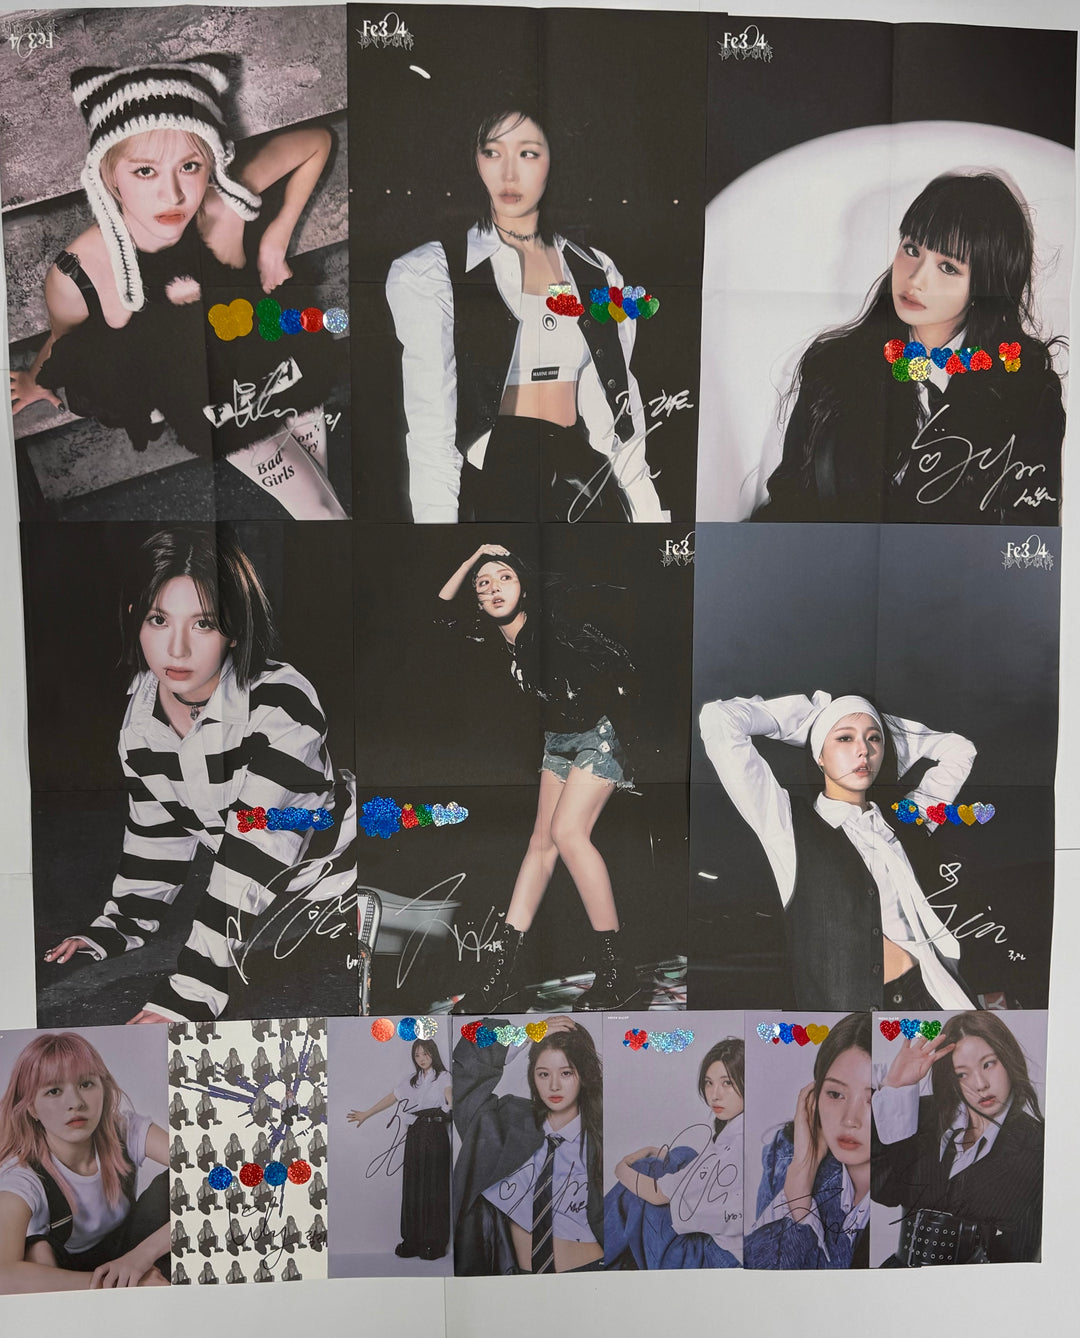 NMIXX "Fe3O4: BREAK" - A Cut Page From Fansign Event Album [24.4.25]